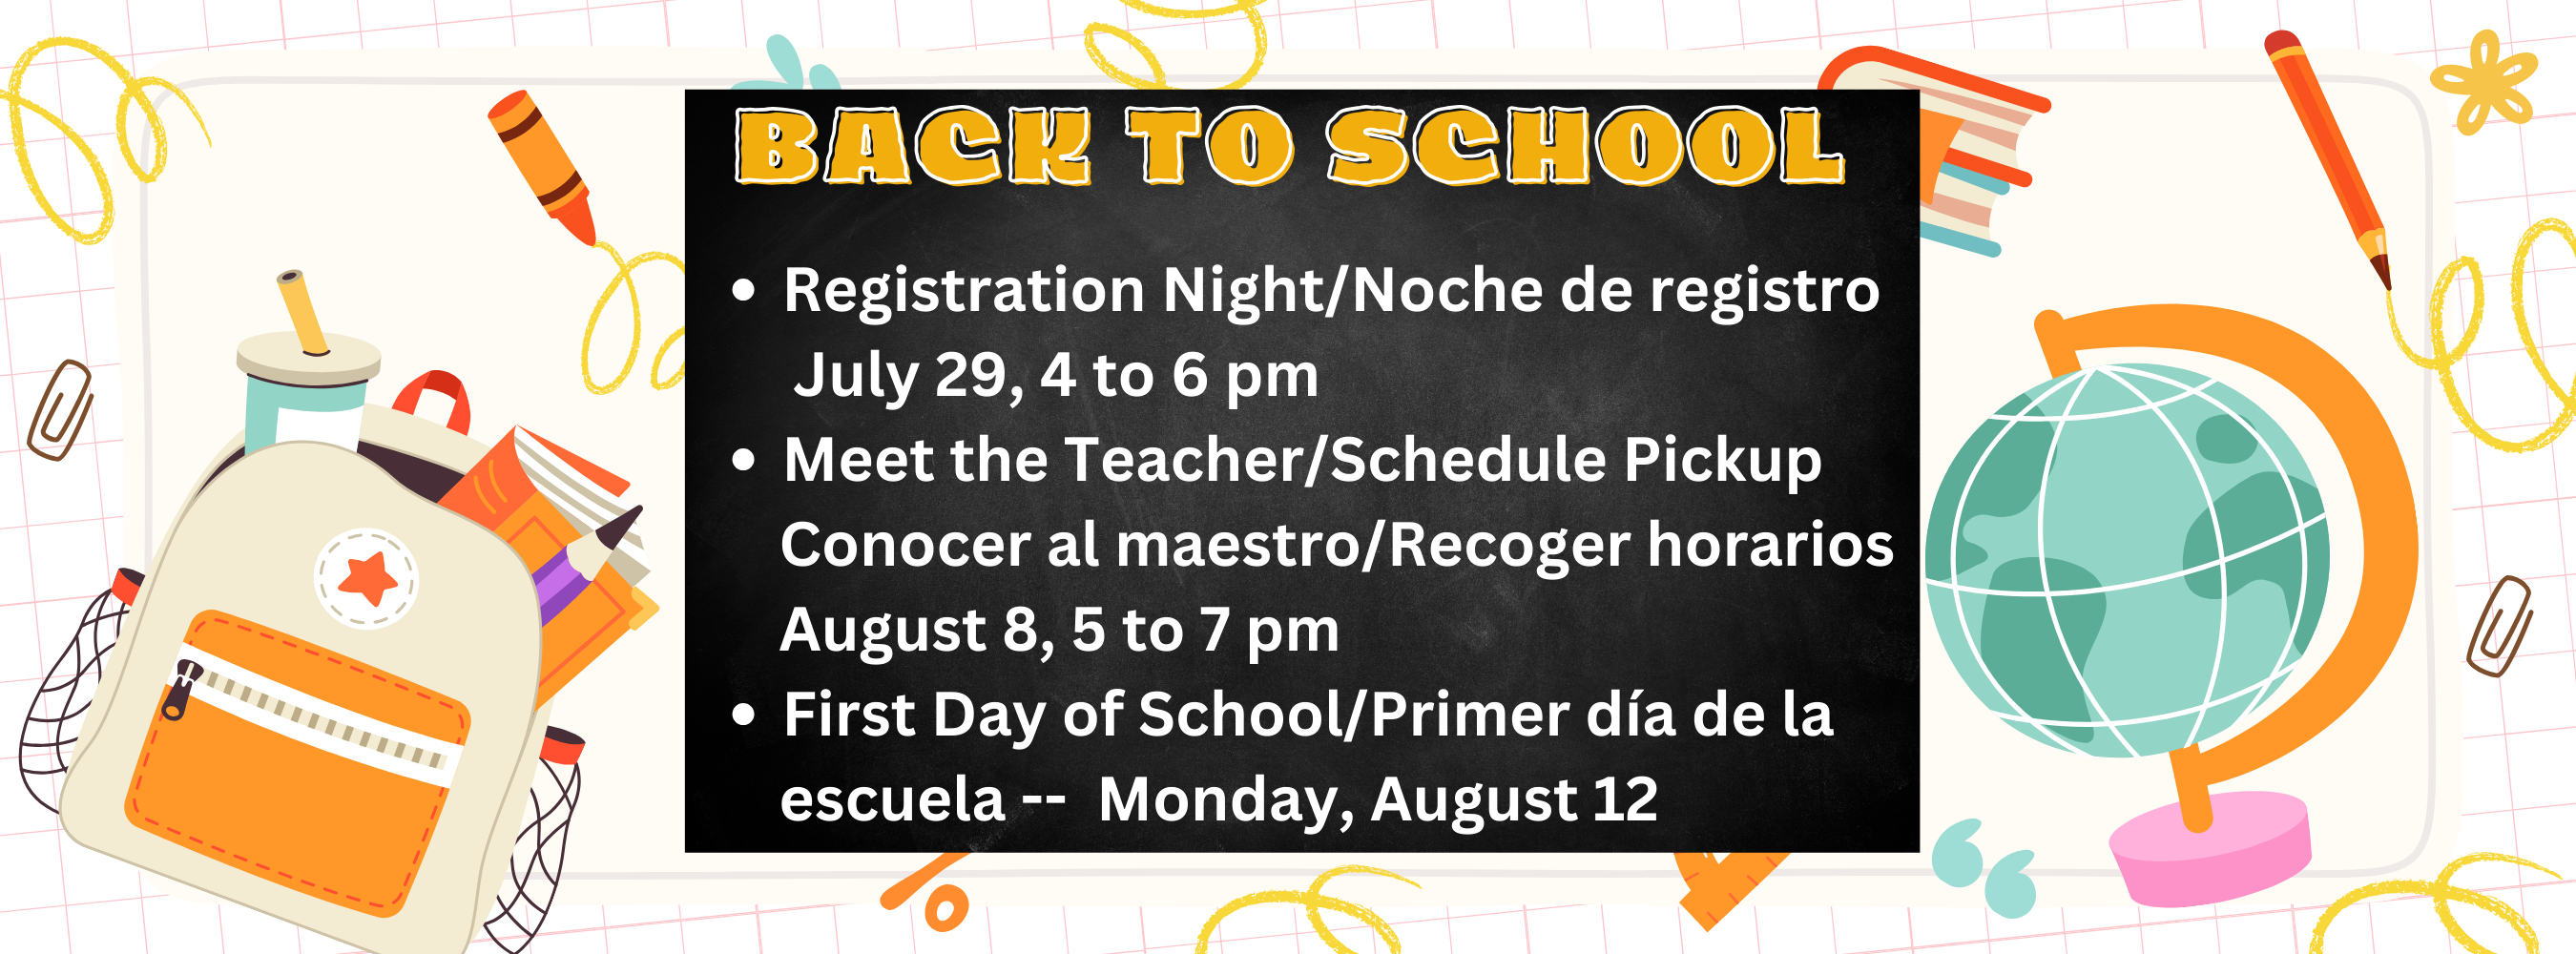 back to school dates